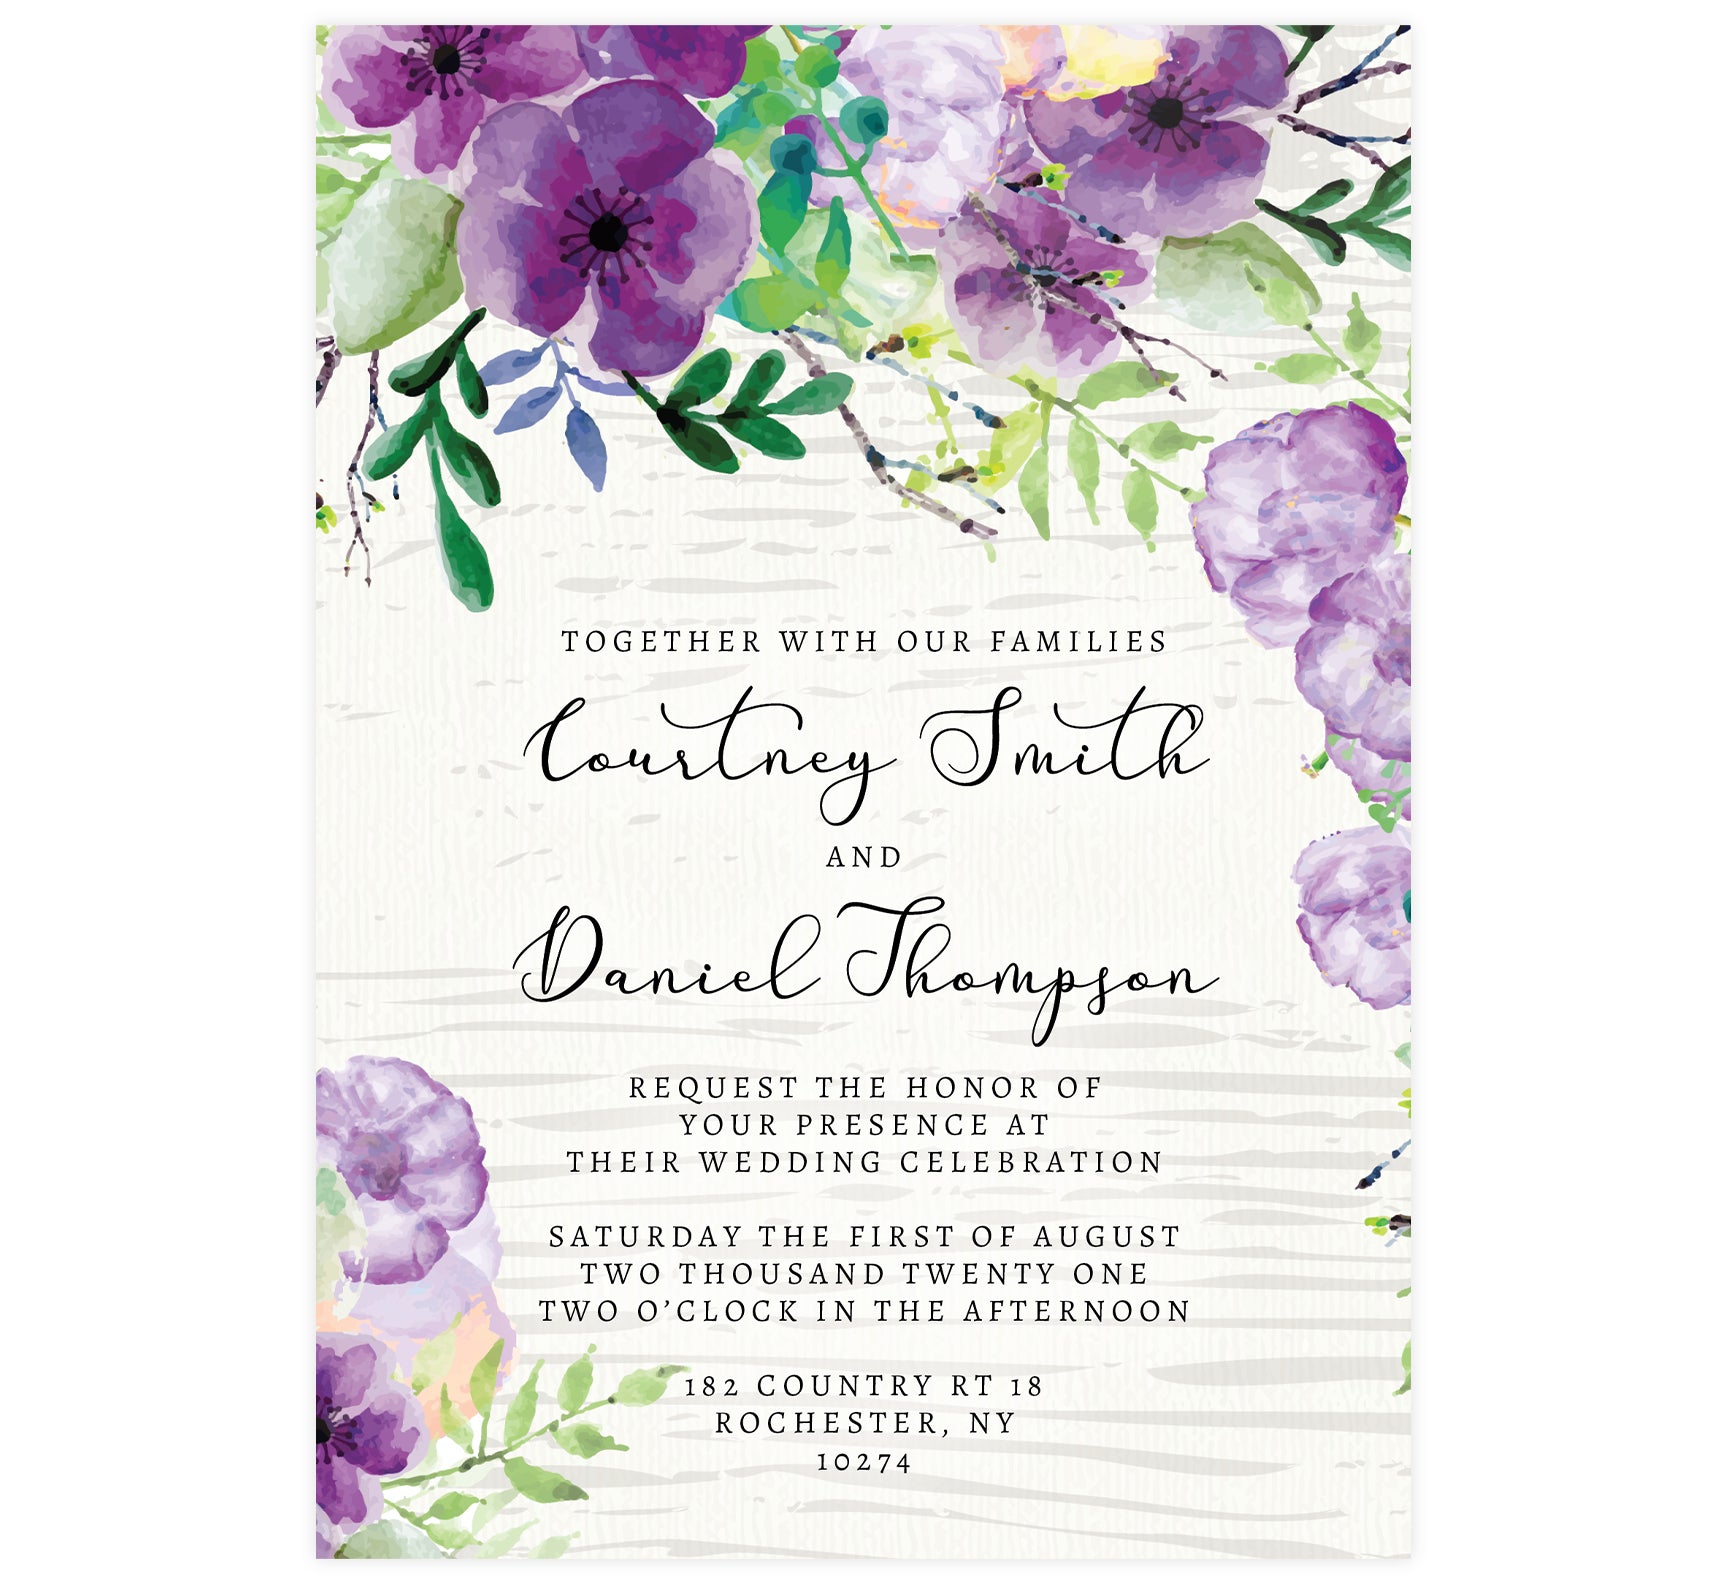 Elegant Purple Watercolor Wedding Invitation; white washed wood with black text and purple watercolor flowers on the top edge and bottom left corner.